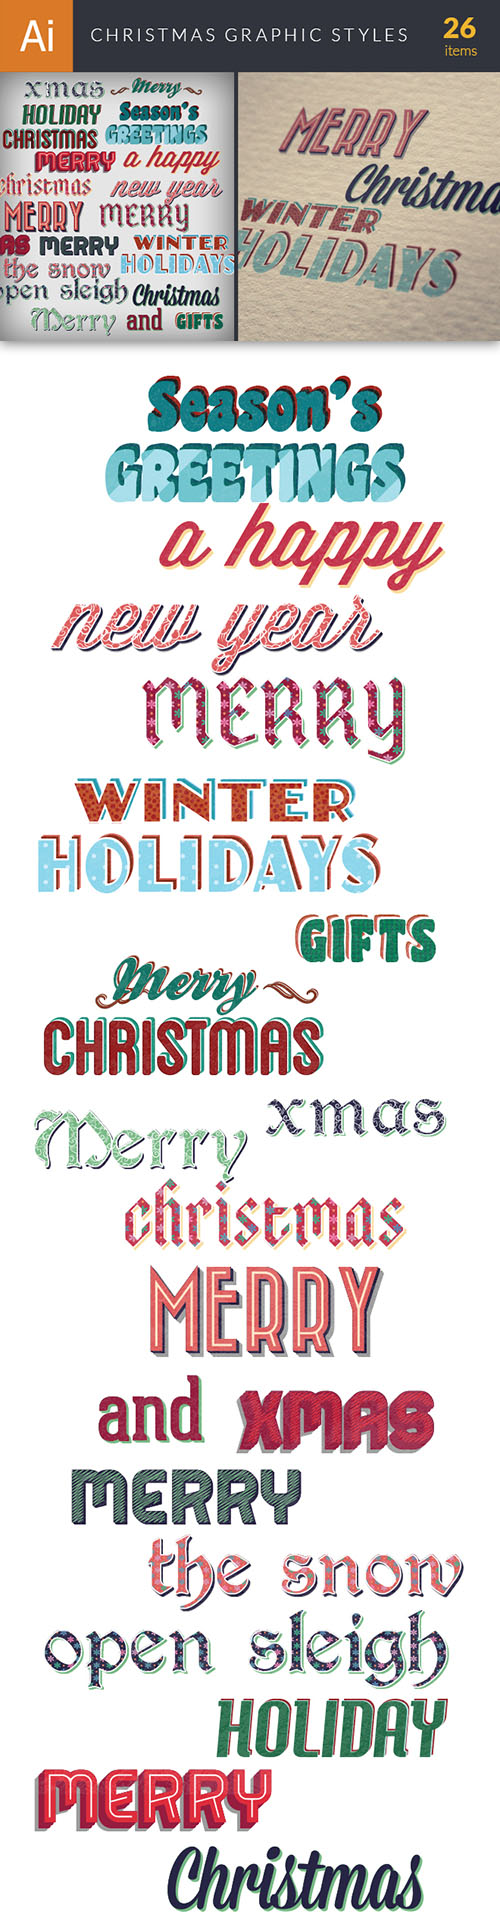 Christmas Graphic Styles Set - Winter Elements